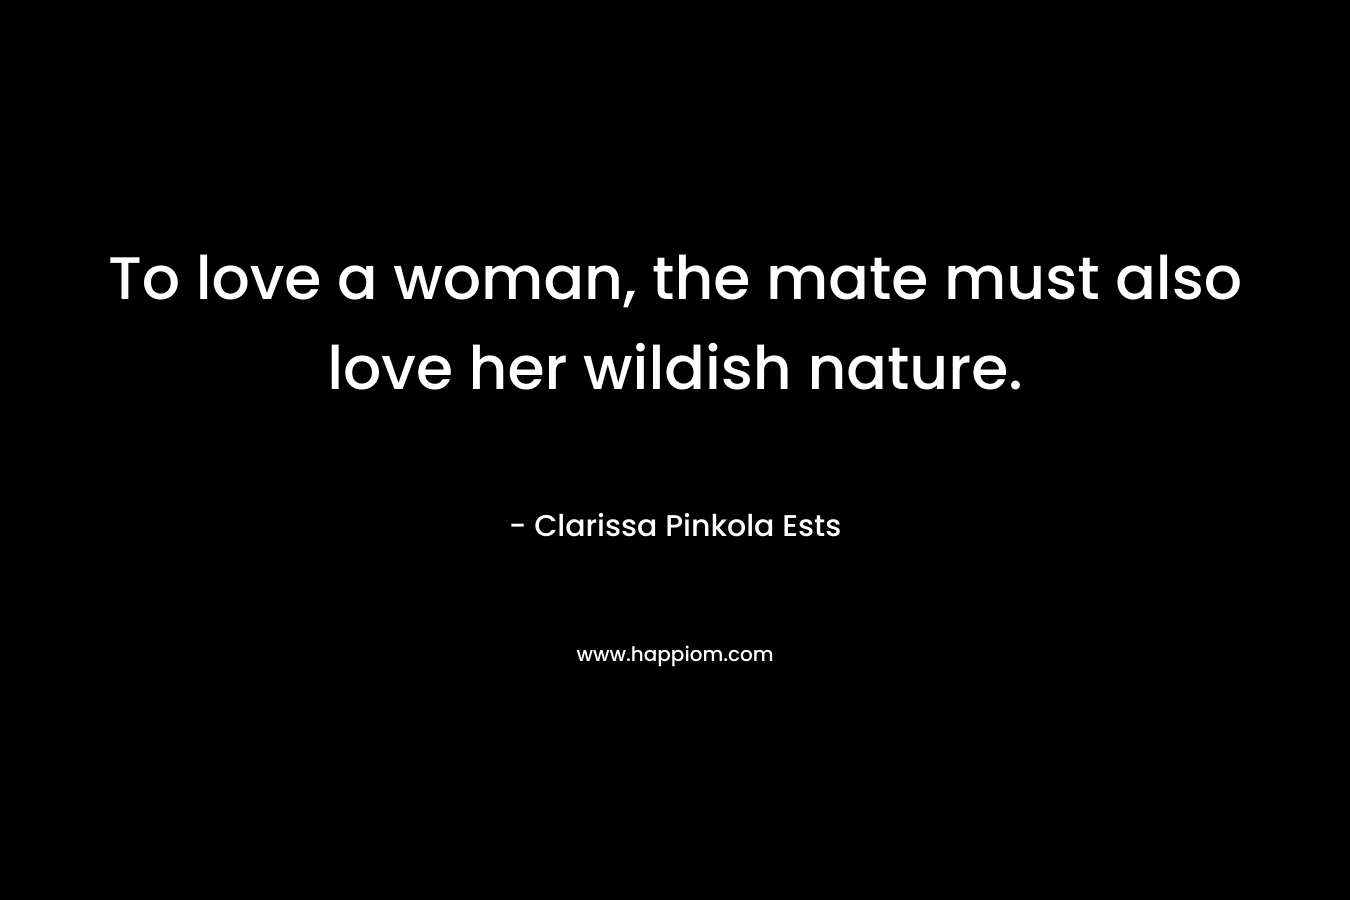 To love a woman, the mate must also love her wildish nature.